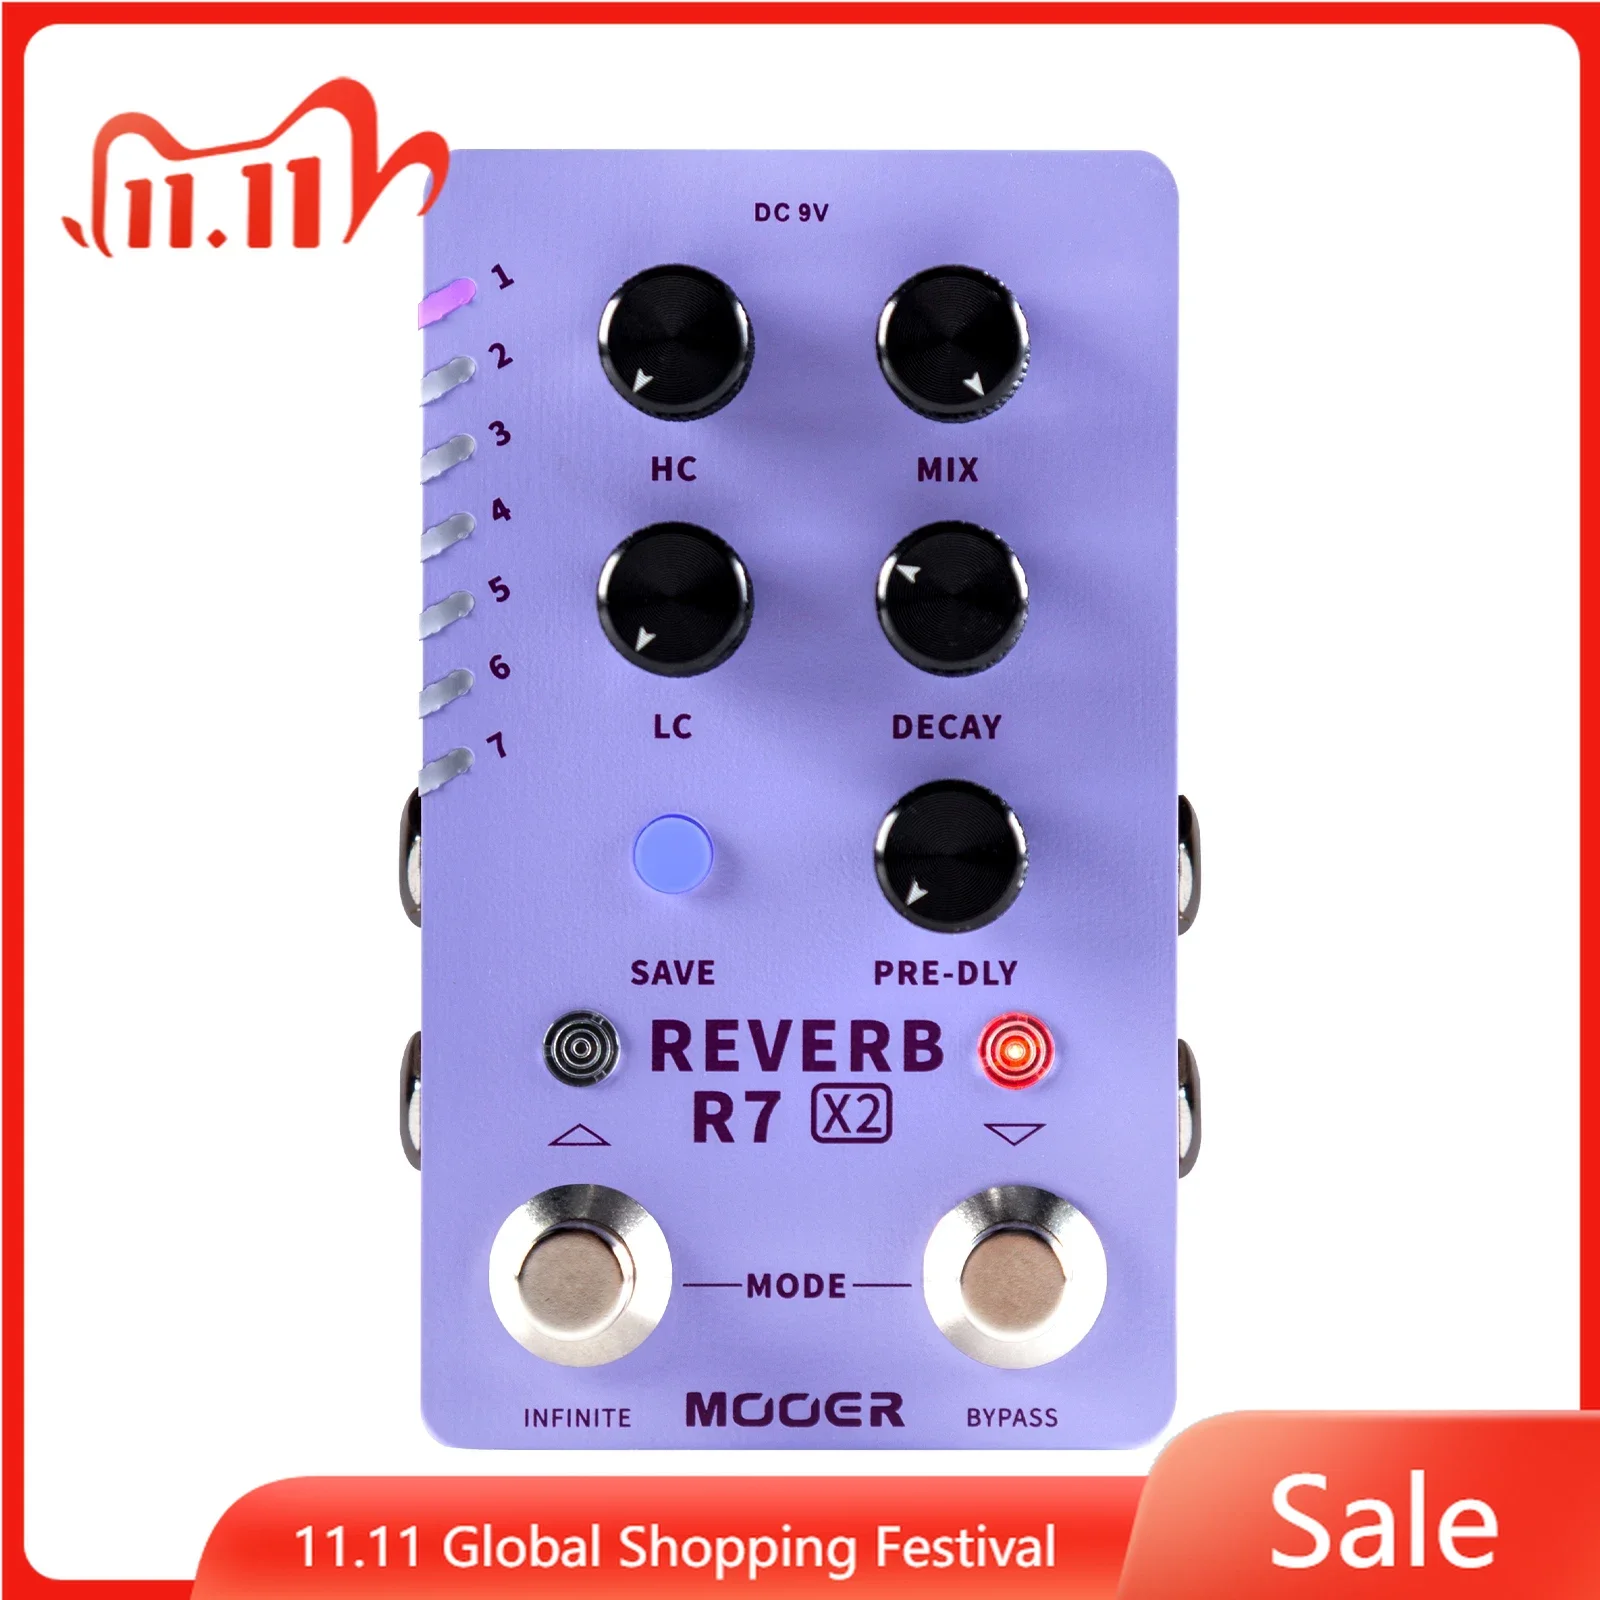 

MOOER R7 Reverb X2 Guitar Effect Pedal Dual Footswitch Stereo Reverb Pedal Effect with 14 Built-in Different Reverbs Effects